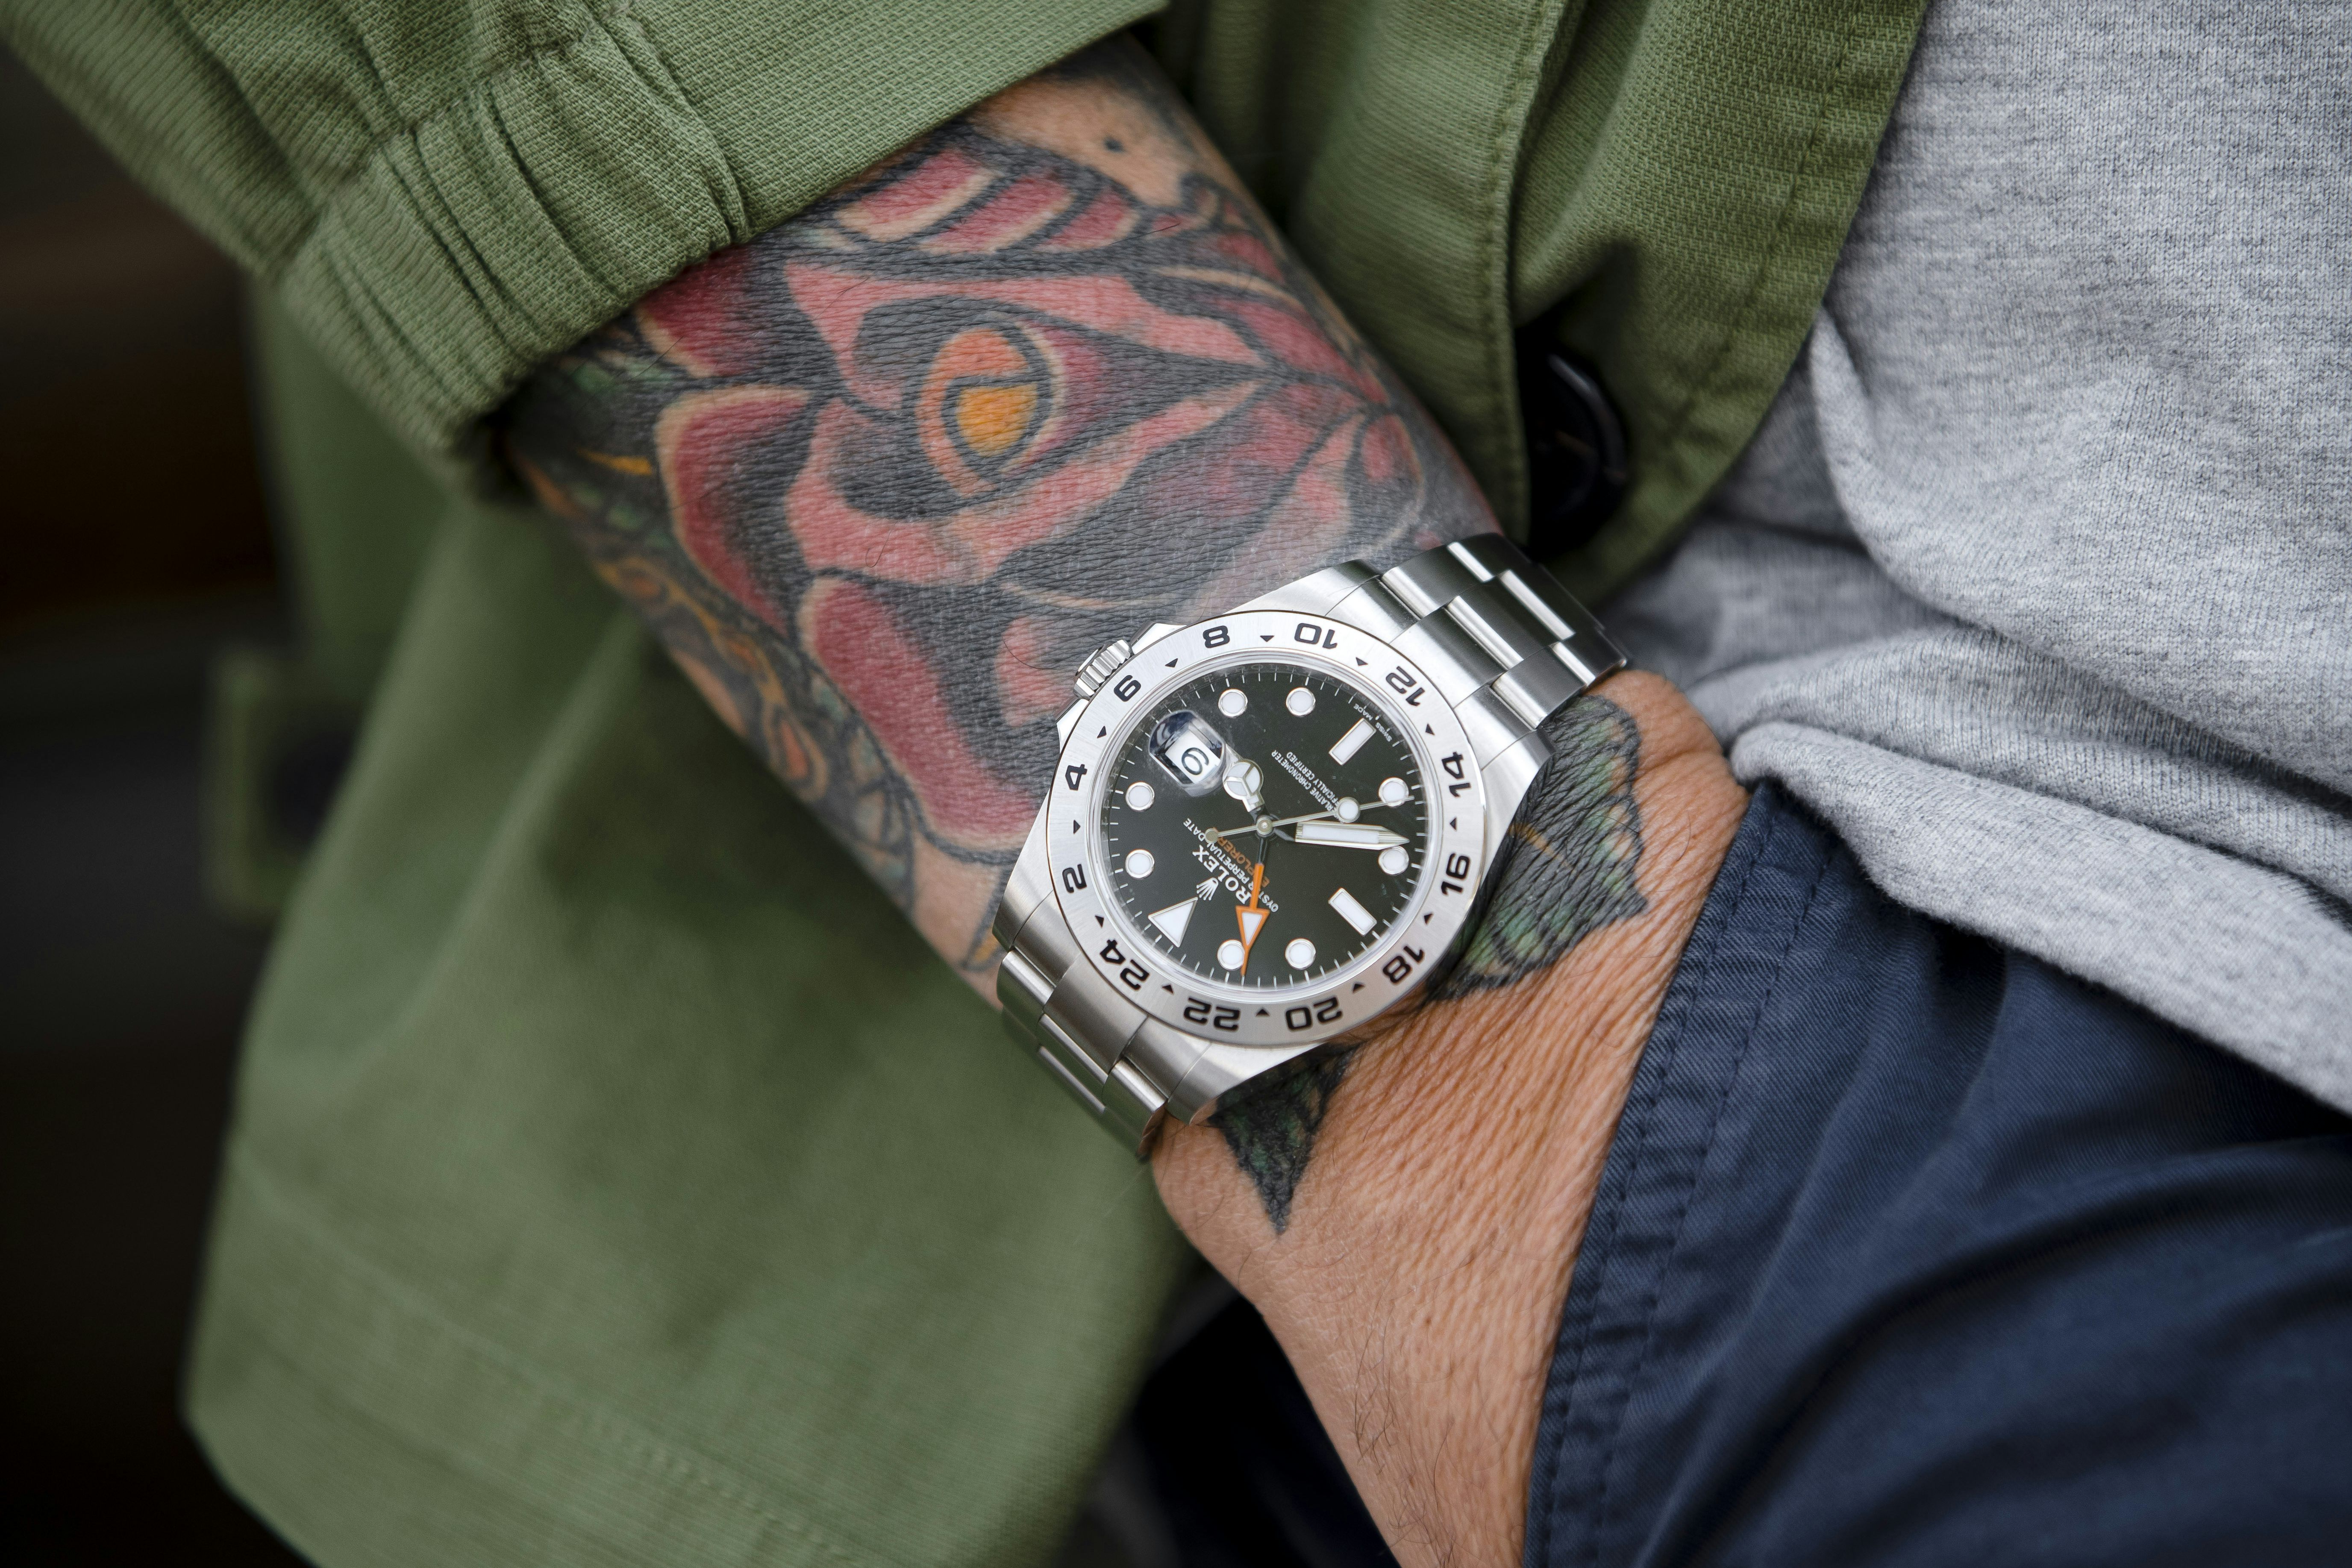 Hodinkee That Uomo Photo Watches Street-Style - Pitti At Show 45 Report: Stole The